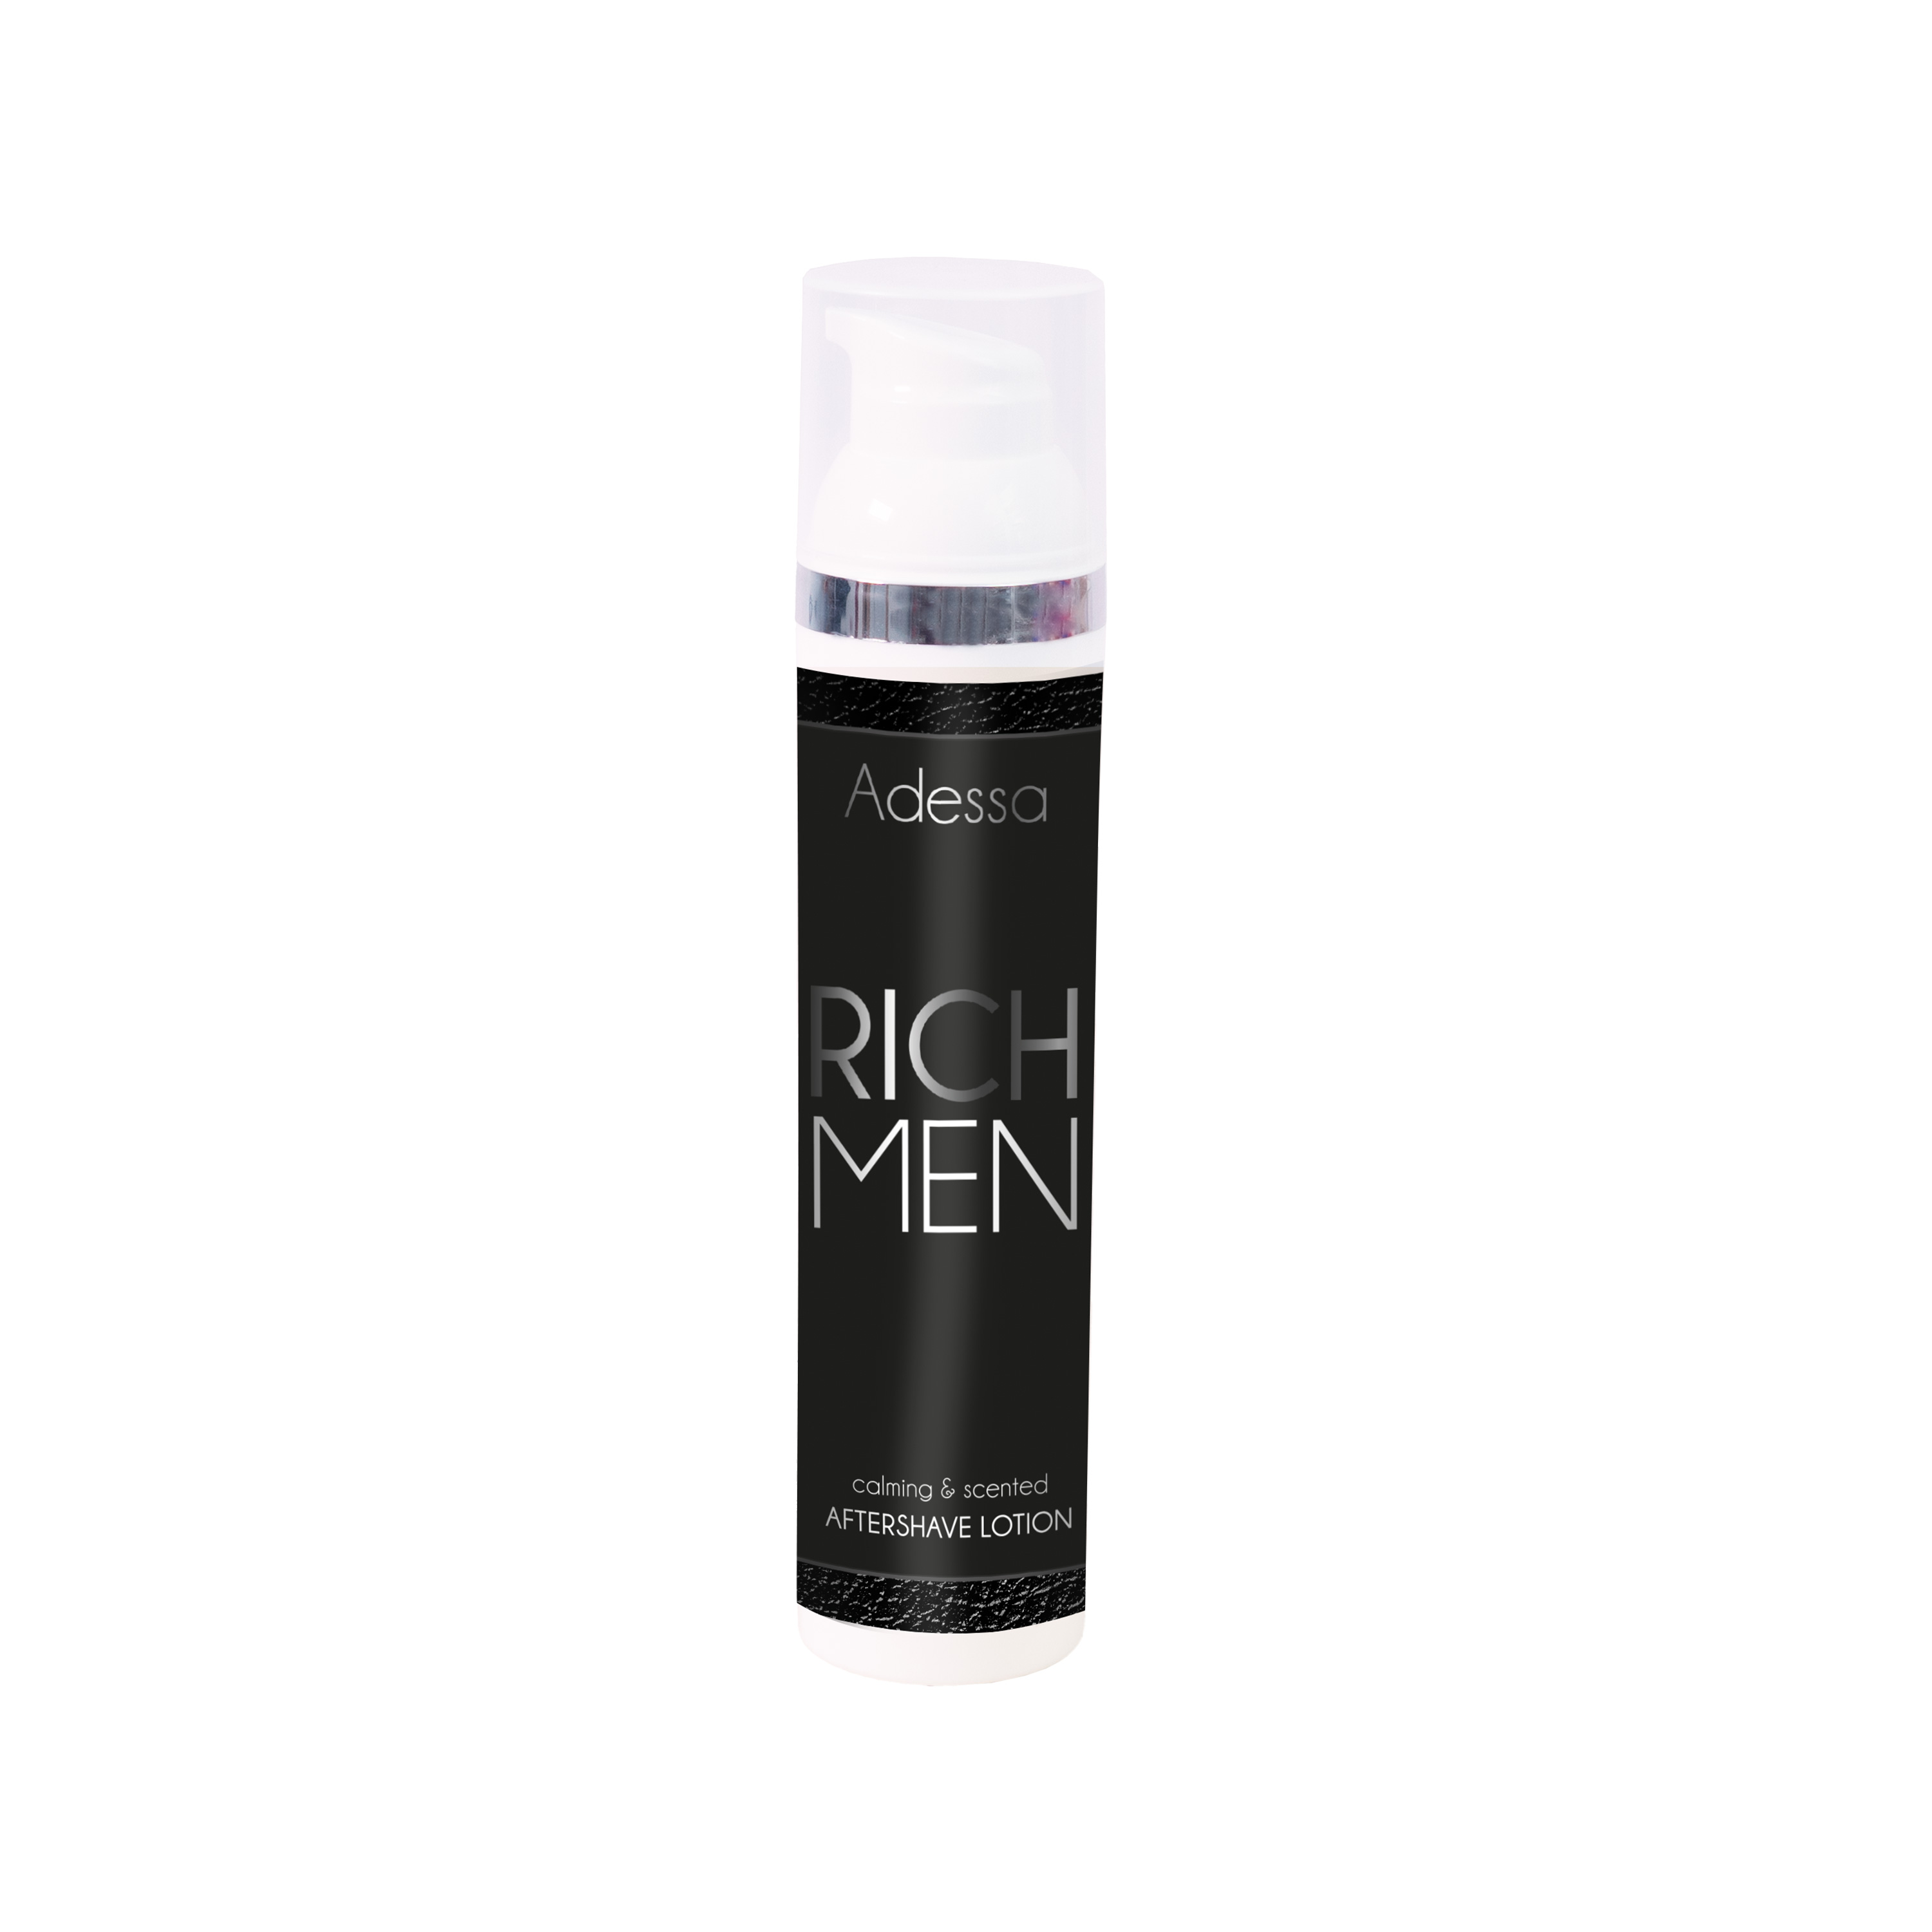 Adessa Aftershave Lotion "RICH MEN", calming & scented, 100ml